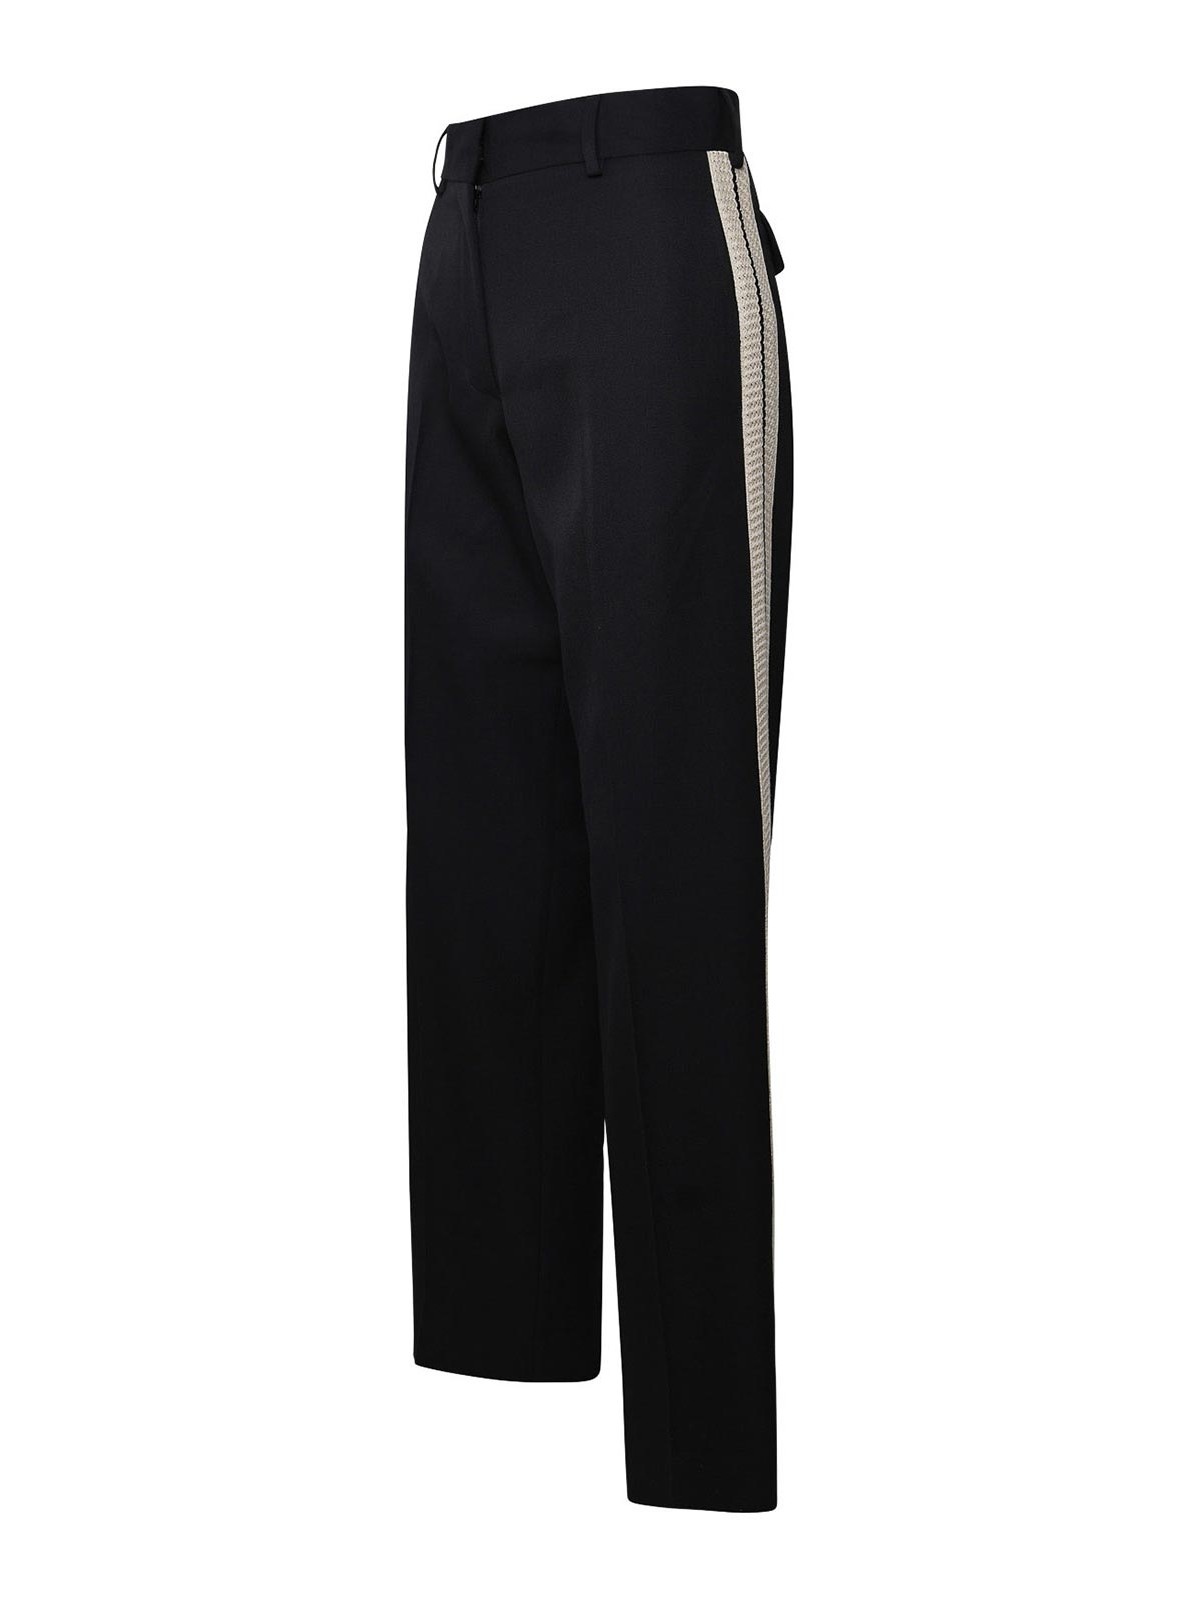 SATURDAYS NYC George Suit Trouser in Bungee | REVOLVE